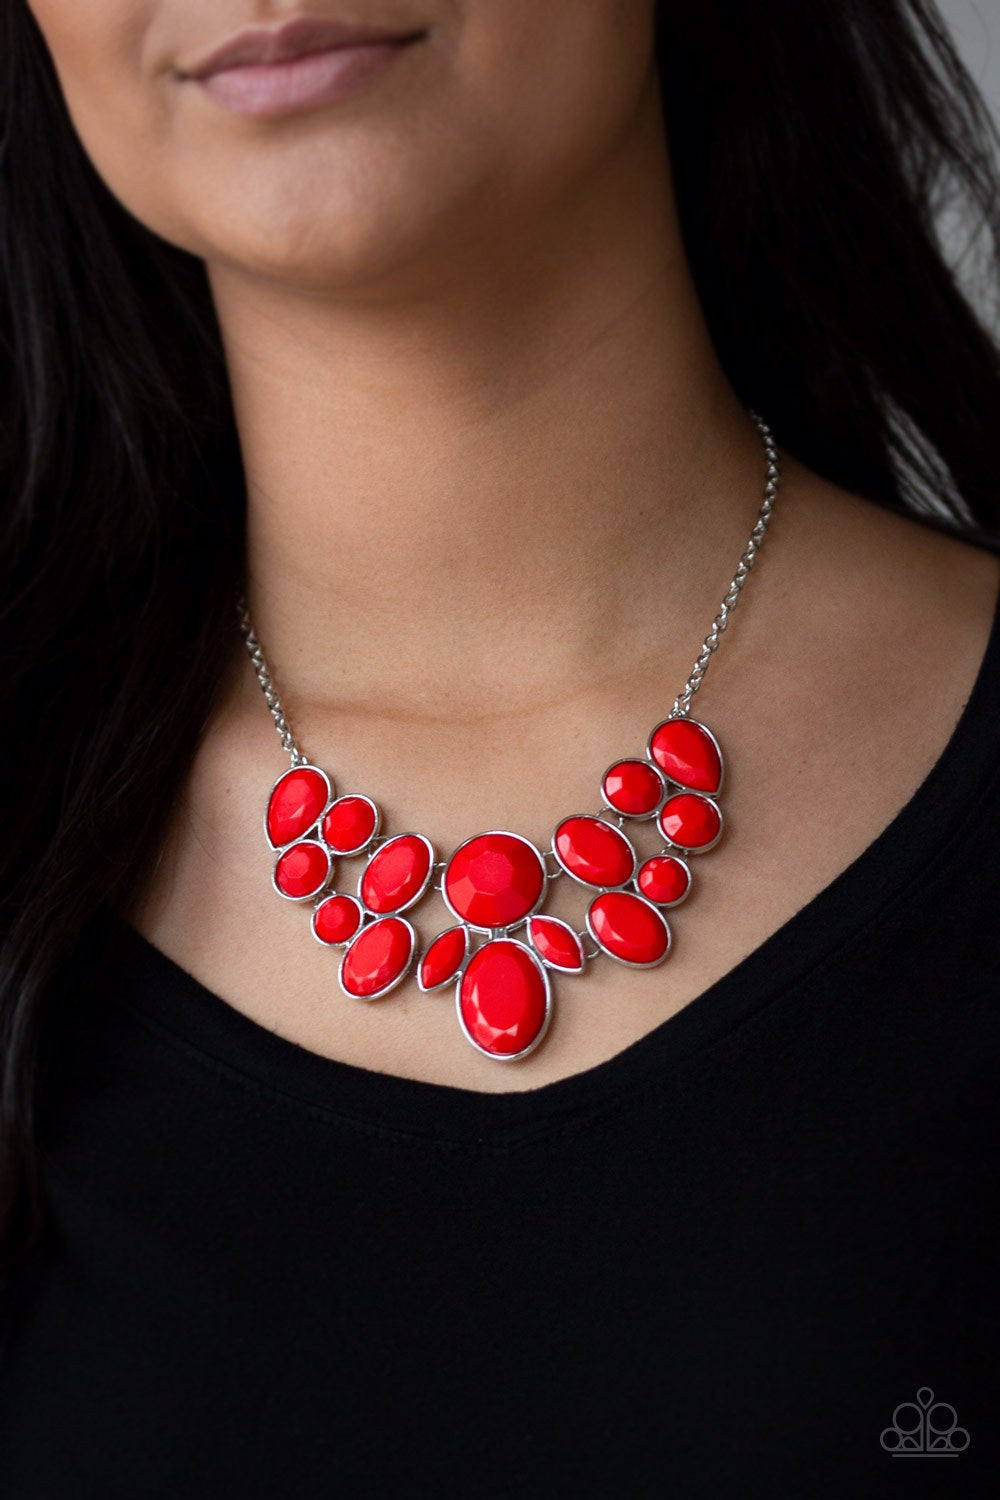 Demi-Diva Red and Silver Necklace - Paparazzi Accessories - Bold red and silver fashion necklace. Featuring regal teardrop, oval, round and marquise style cuts, glittery red gems coalesce into a glittery pendant below the collar, creating a knockout pendant.